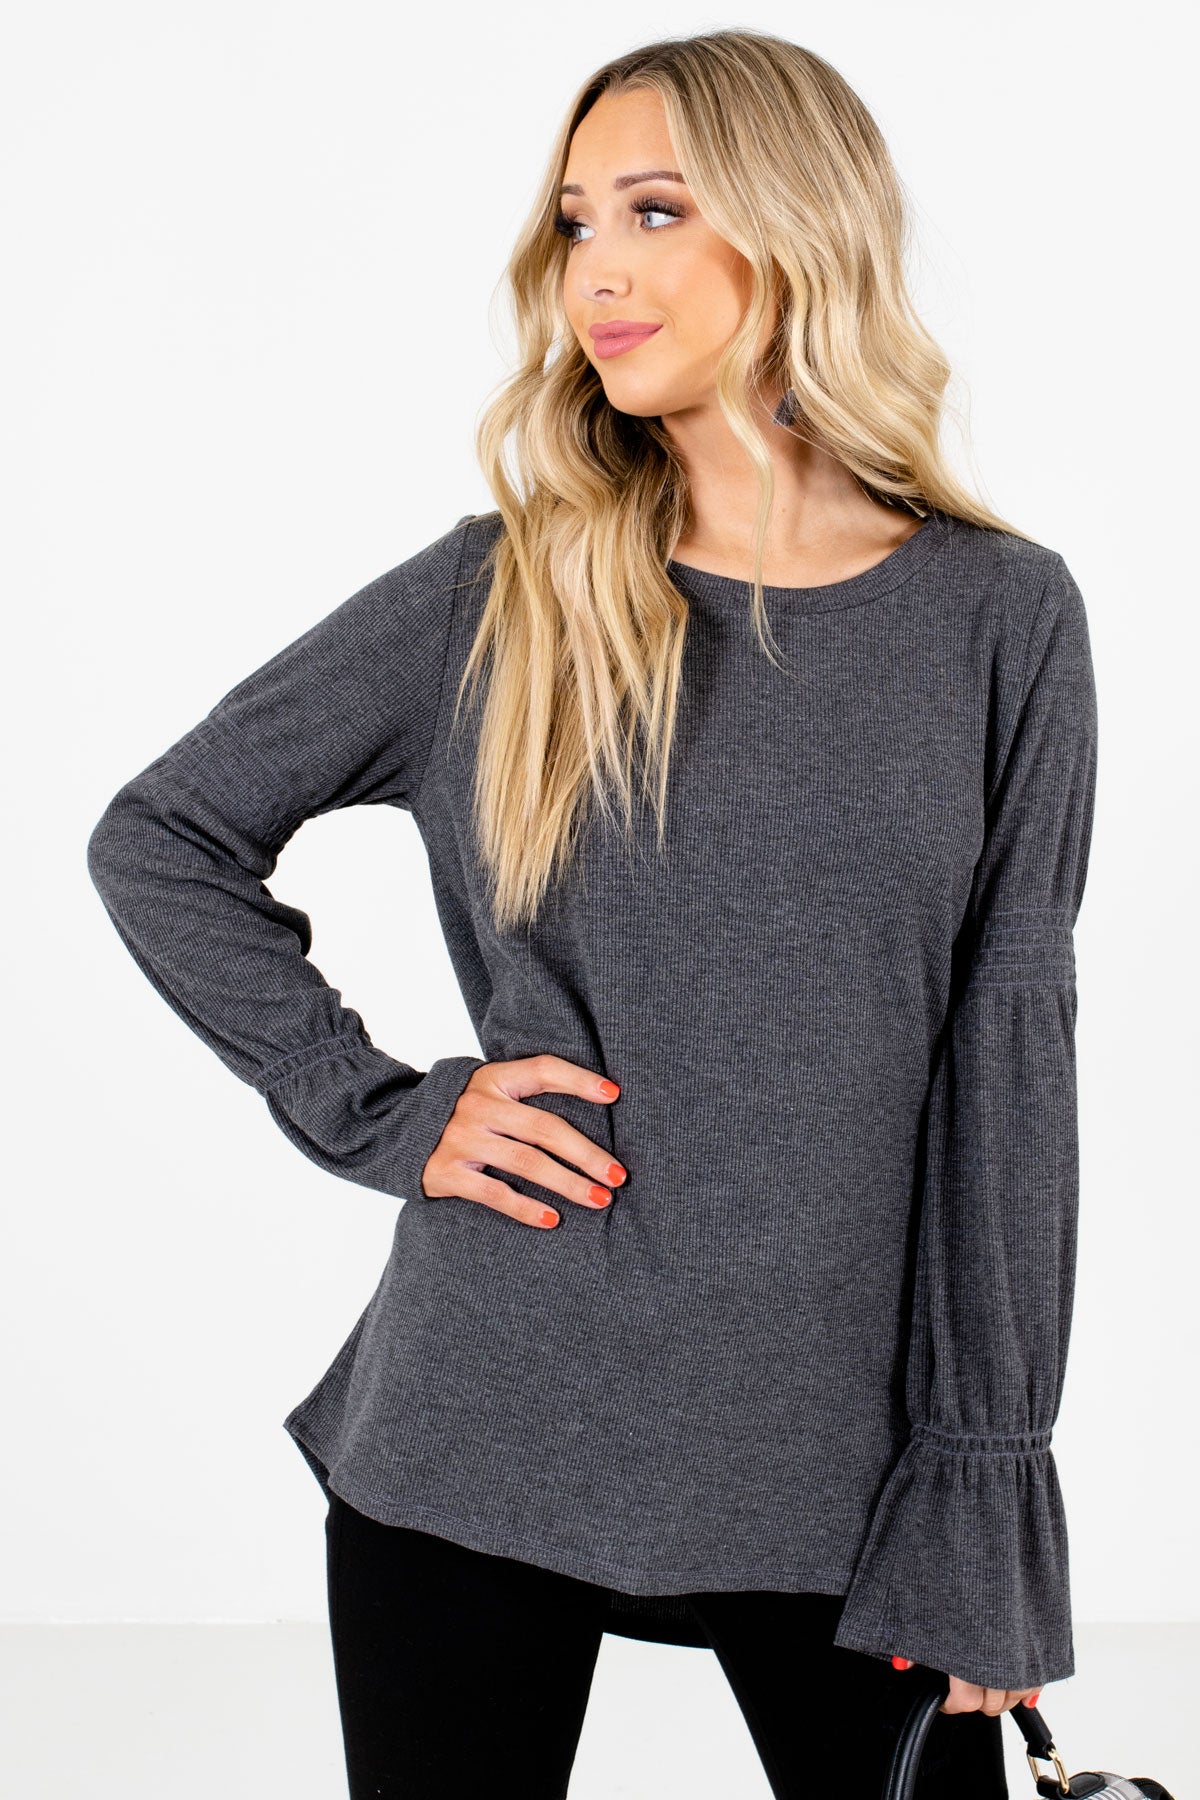 Women’s Charcoal Gray Smocked Accented Boutique Tops